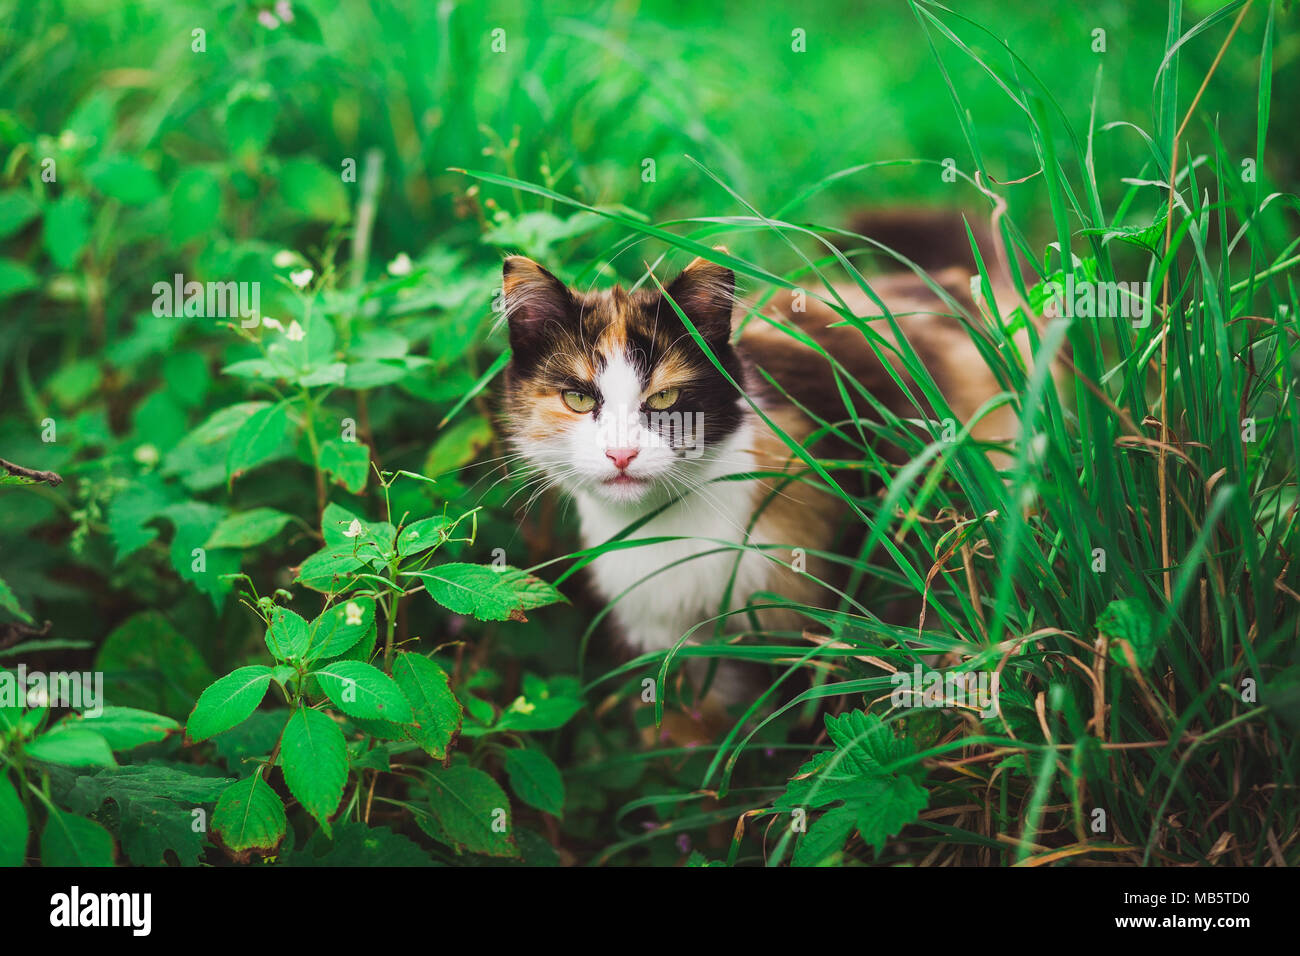 Closeup portrait of face of beautiful young angry looking cat hiding among fresh green grass. Cat stares at camera outside. Horizontal color photograp Stock Photo